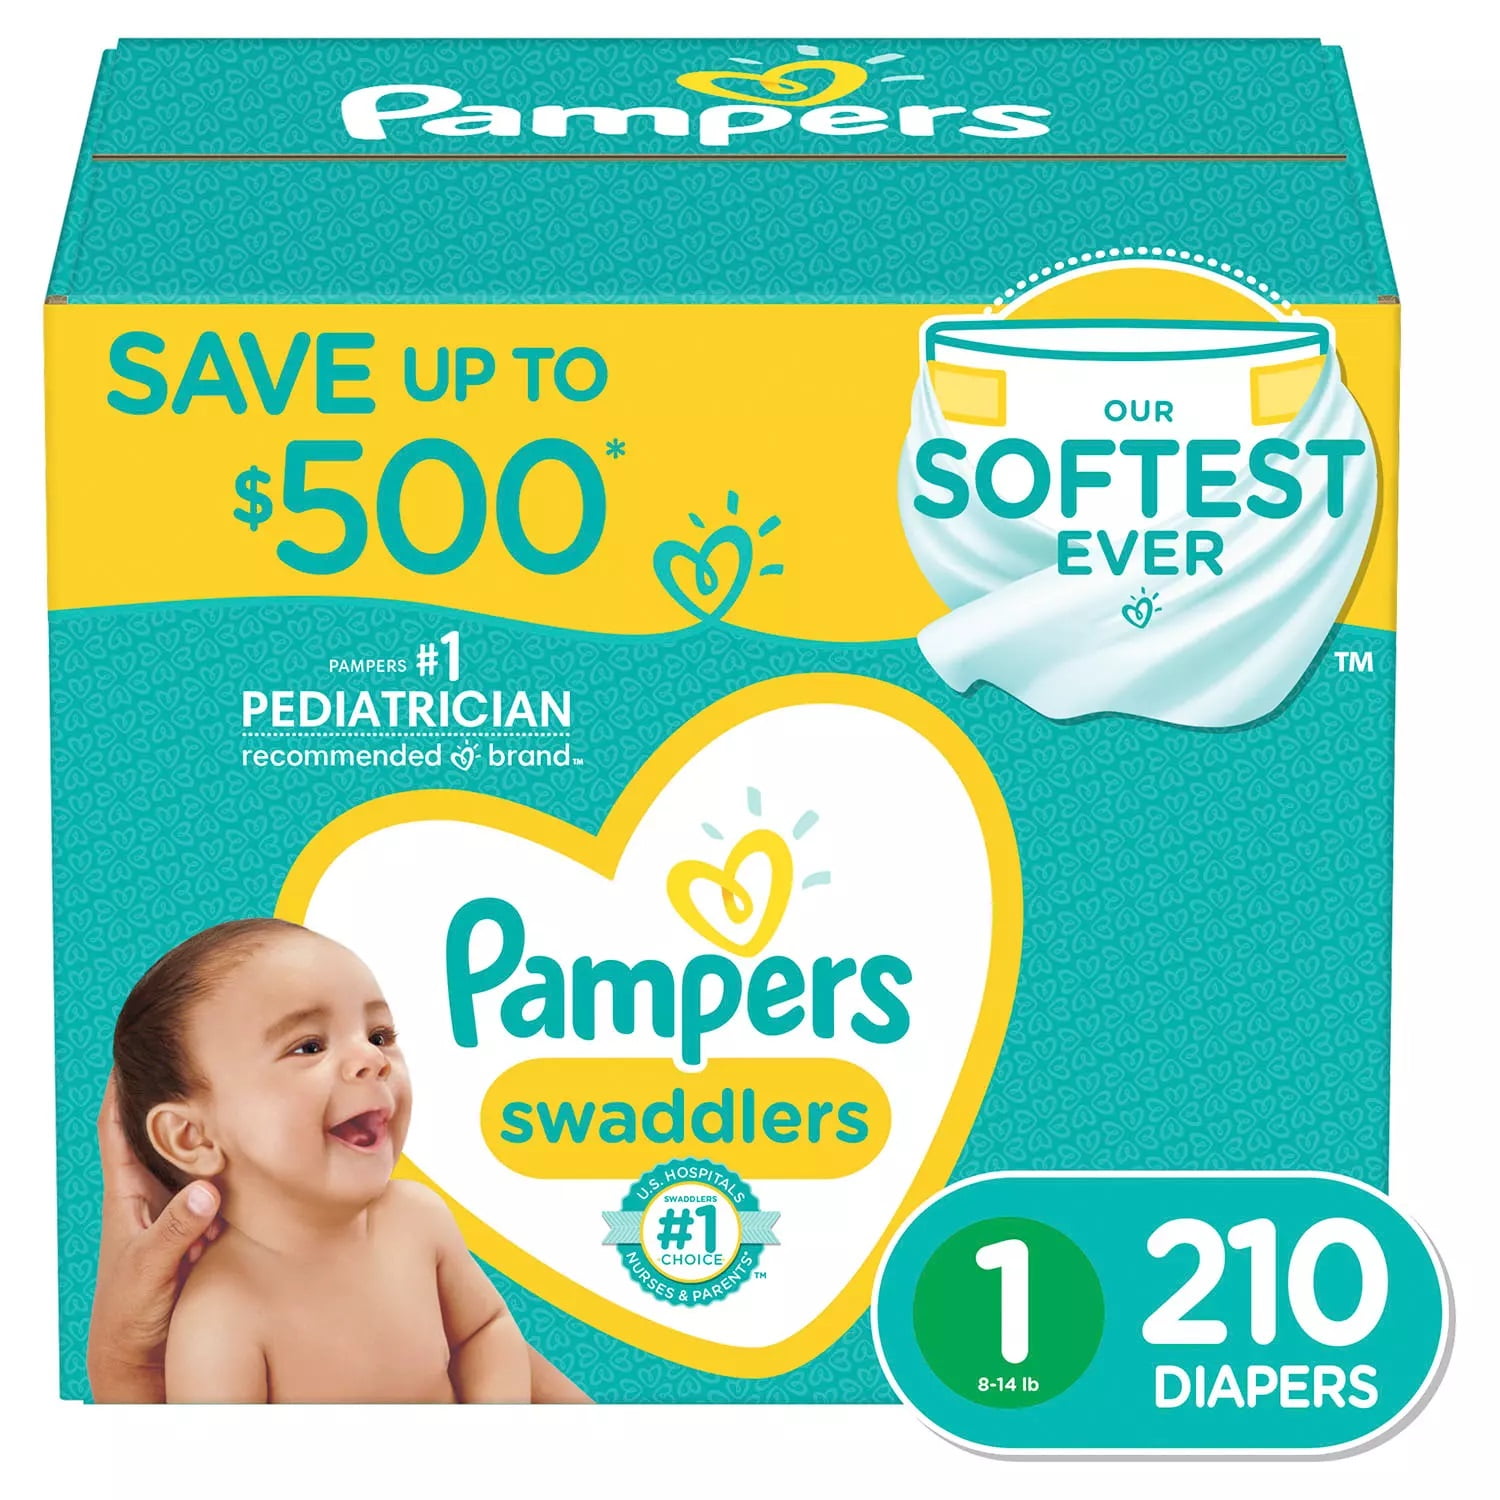 Pampers Premium Protection Softest Comfort Nappies Jumbo Pack-Size 1 144-Count 